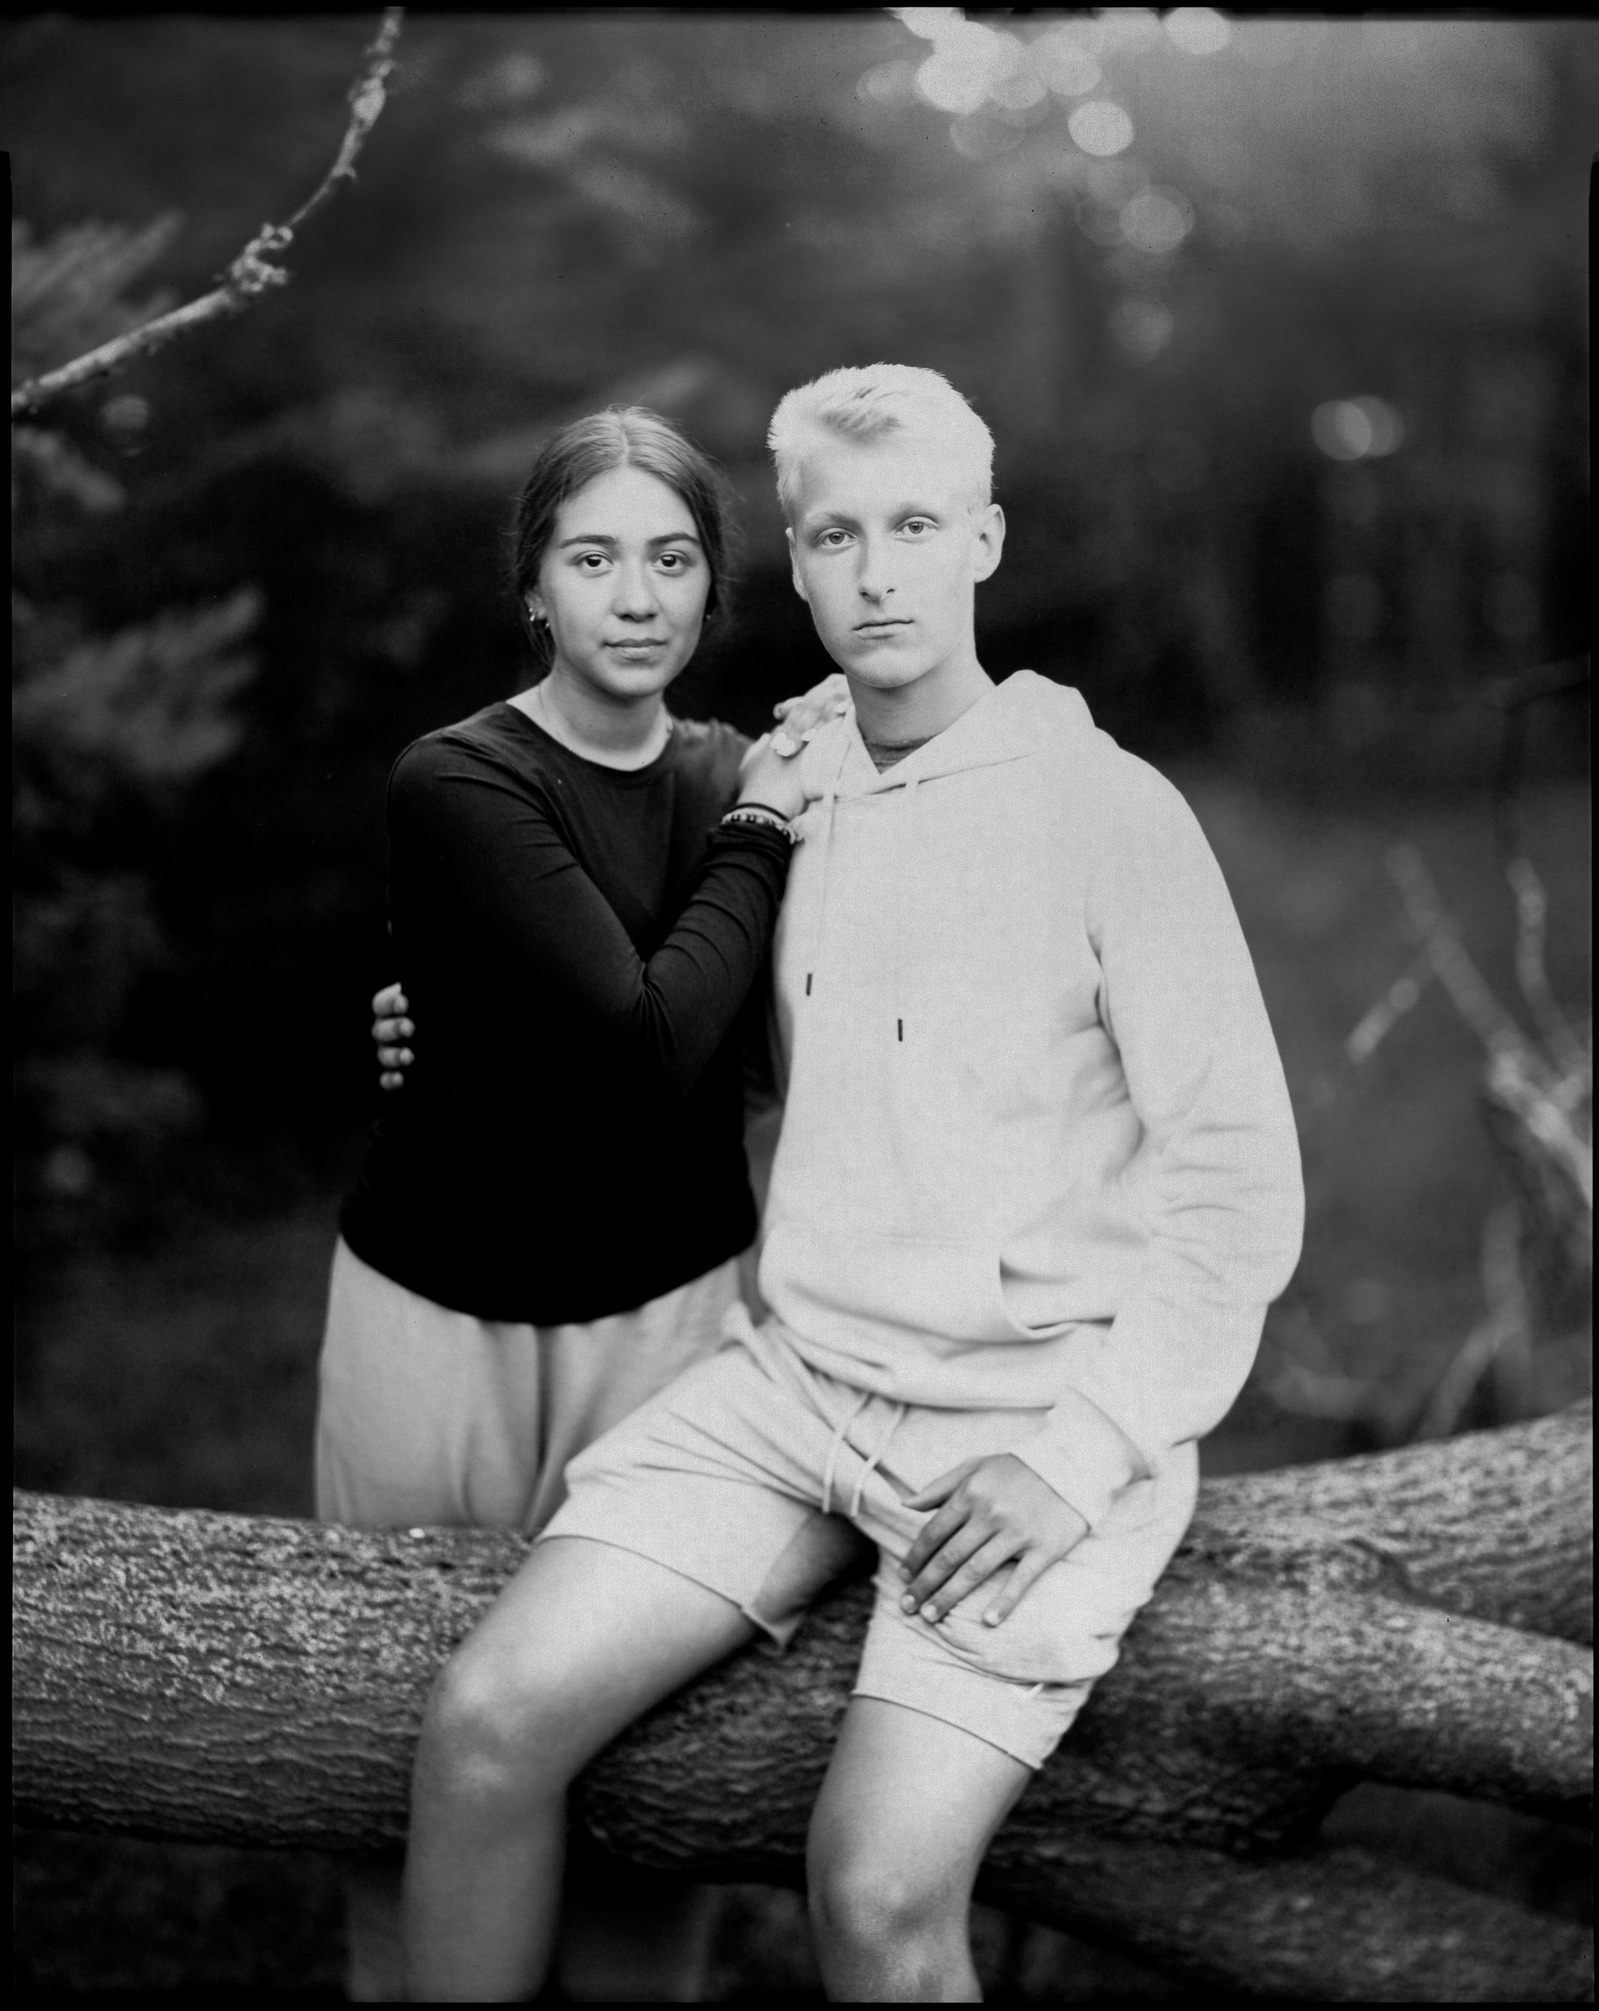 Large format paper negative portrait of a young man and woman outdoors sitting on fallen tree.